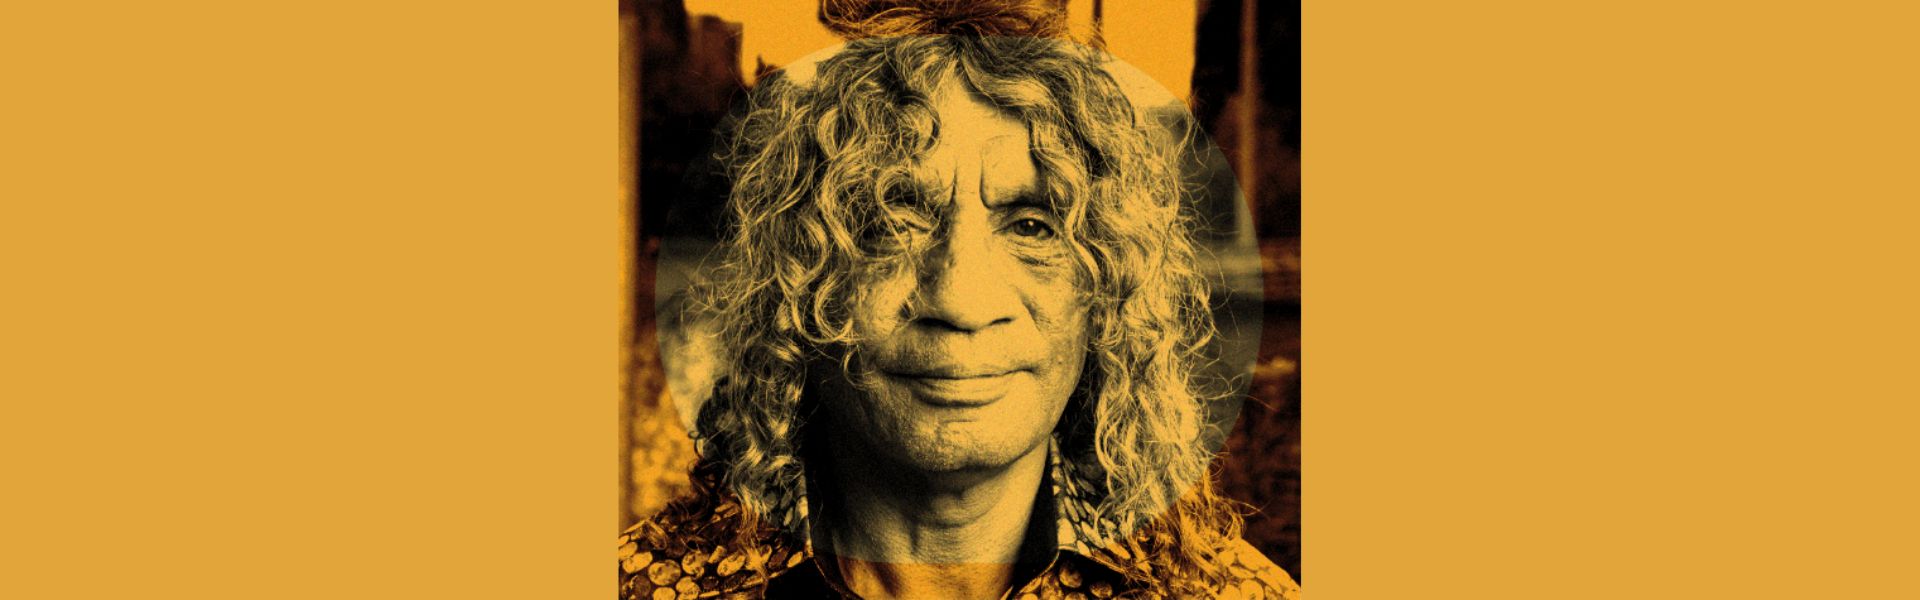 An aboriginal man with long curly hair is wearing a buttoned shirt. A yellow hue overlays the image.